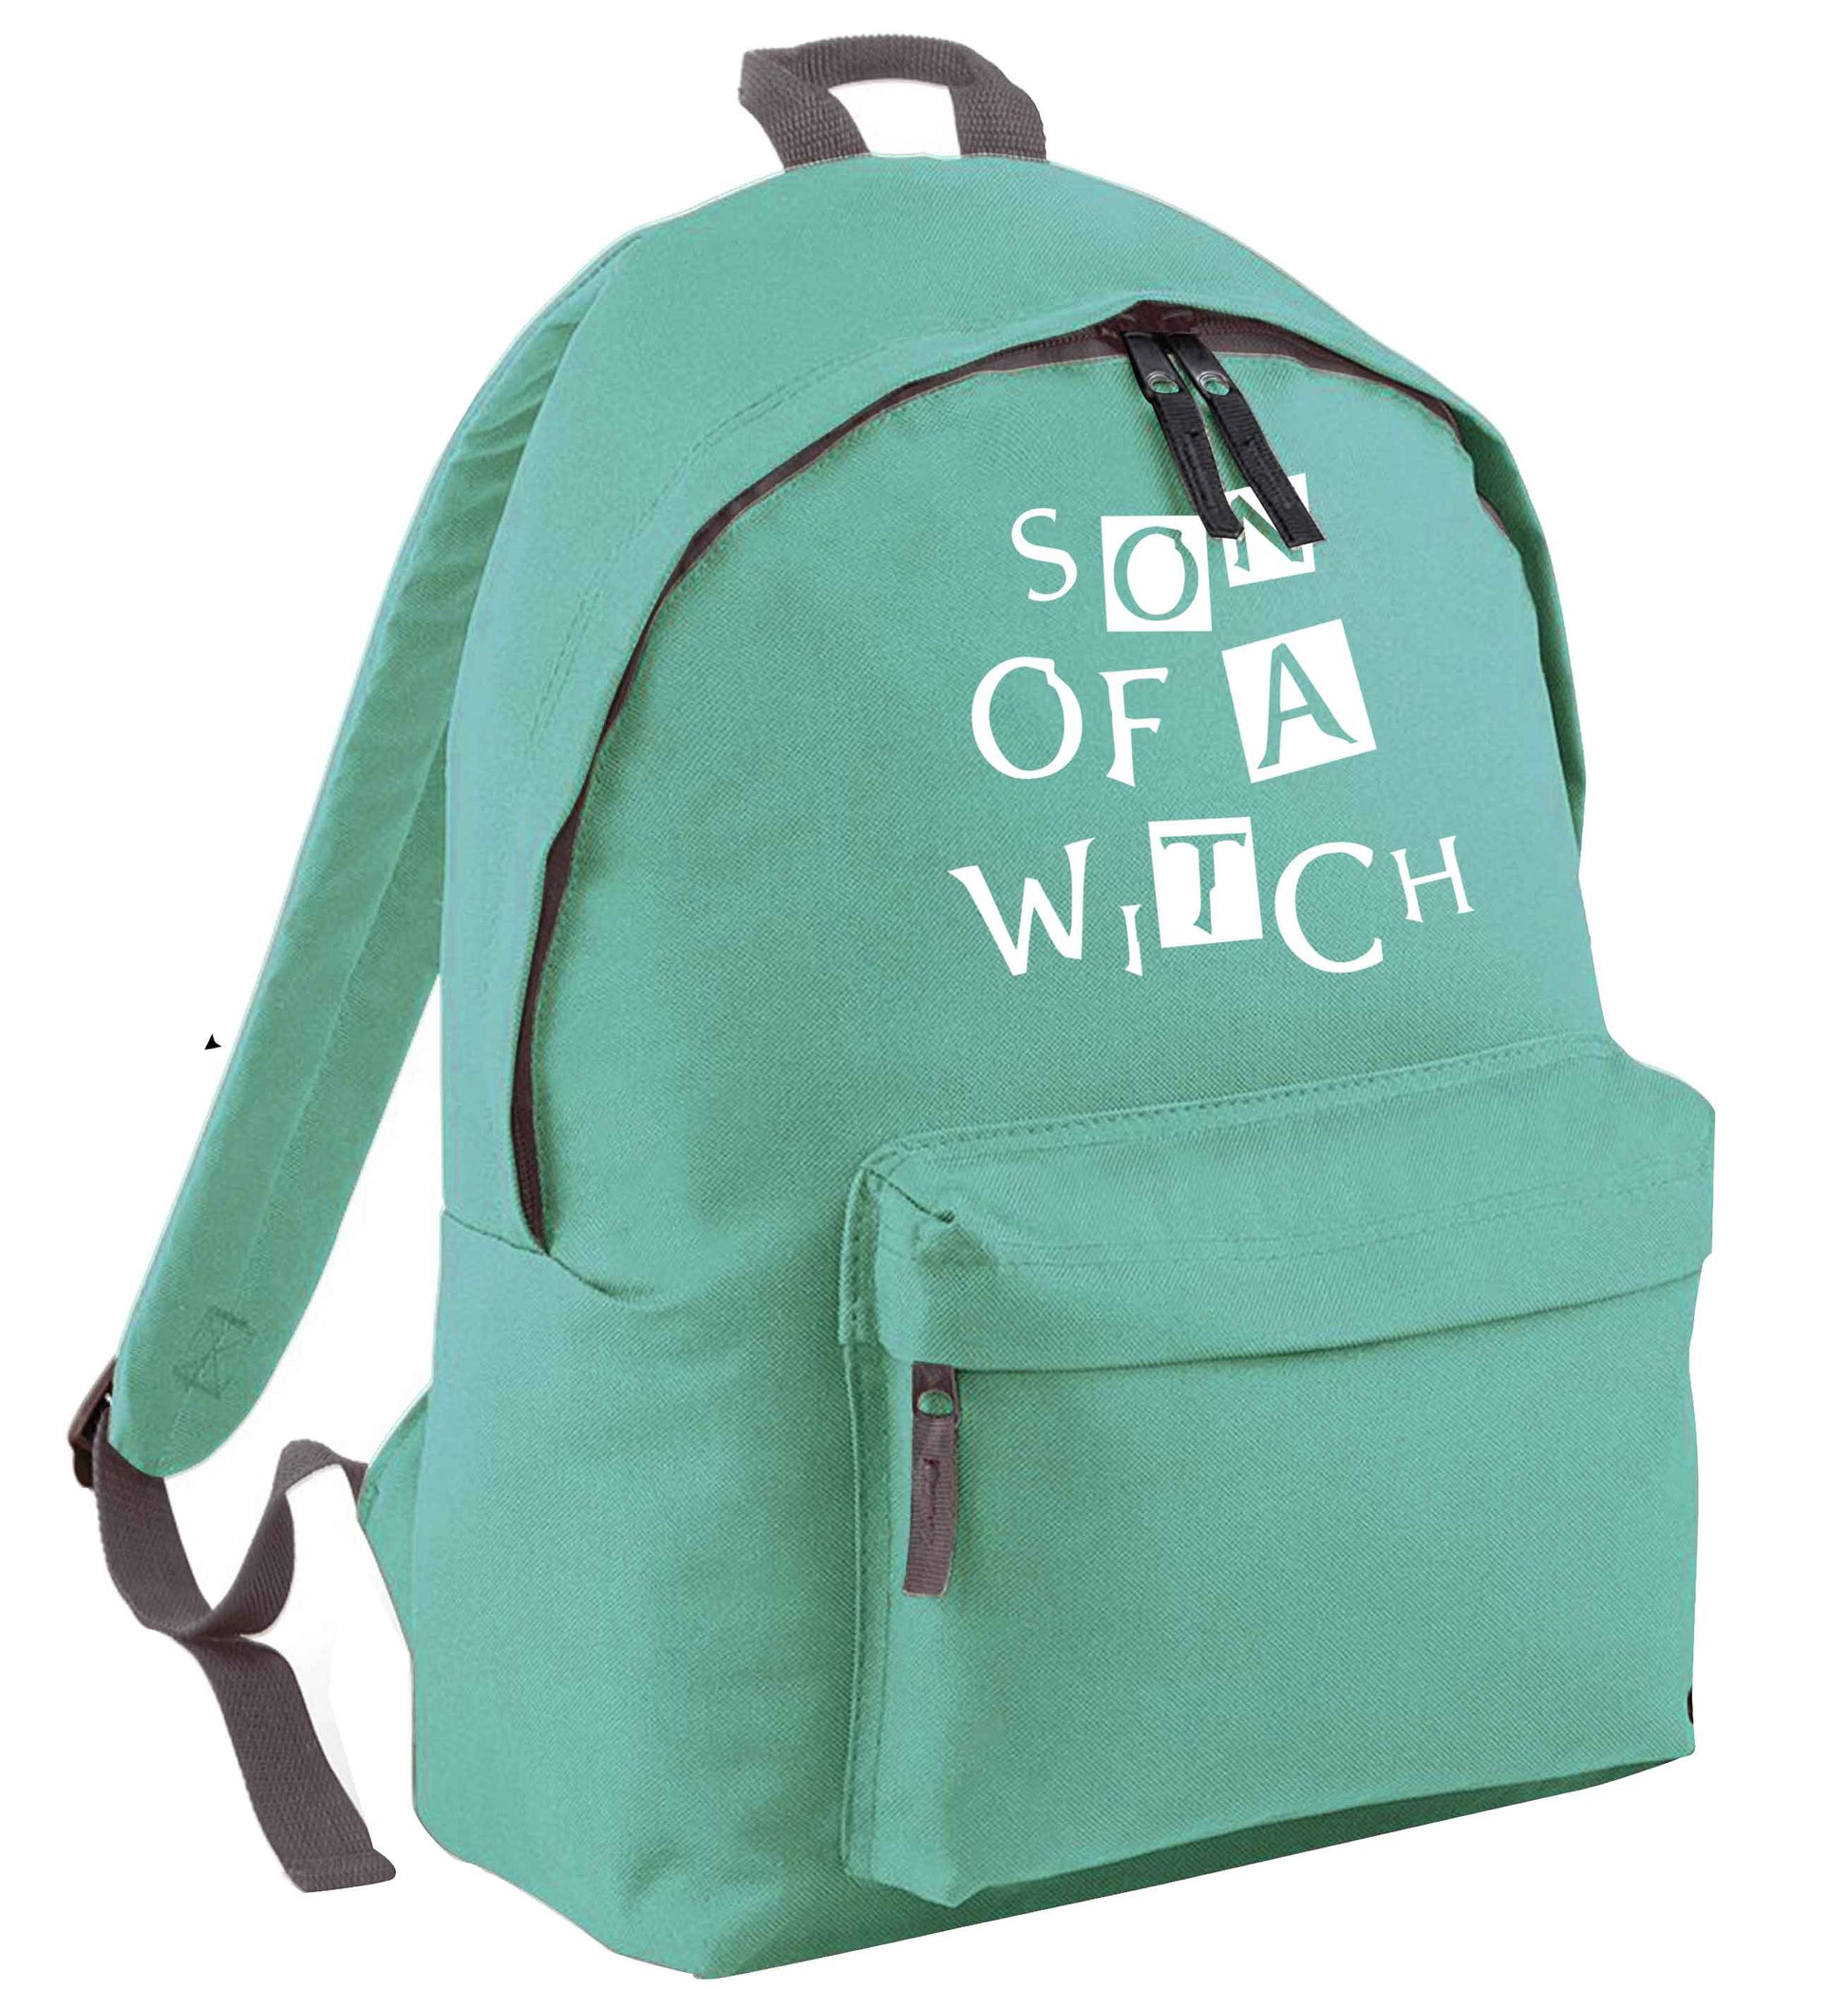 Son of a witch mint adults backpack